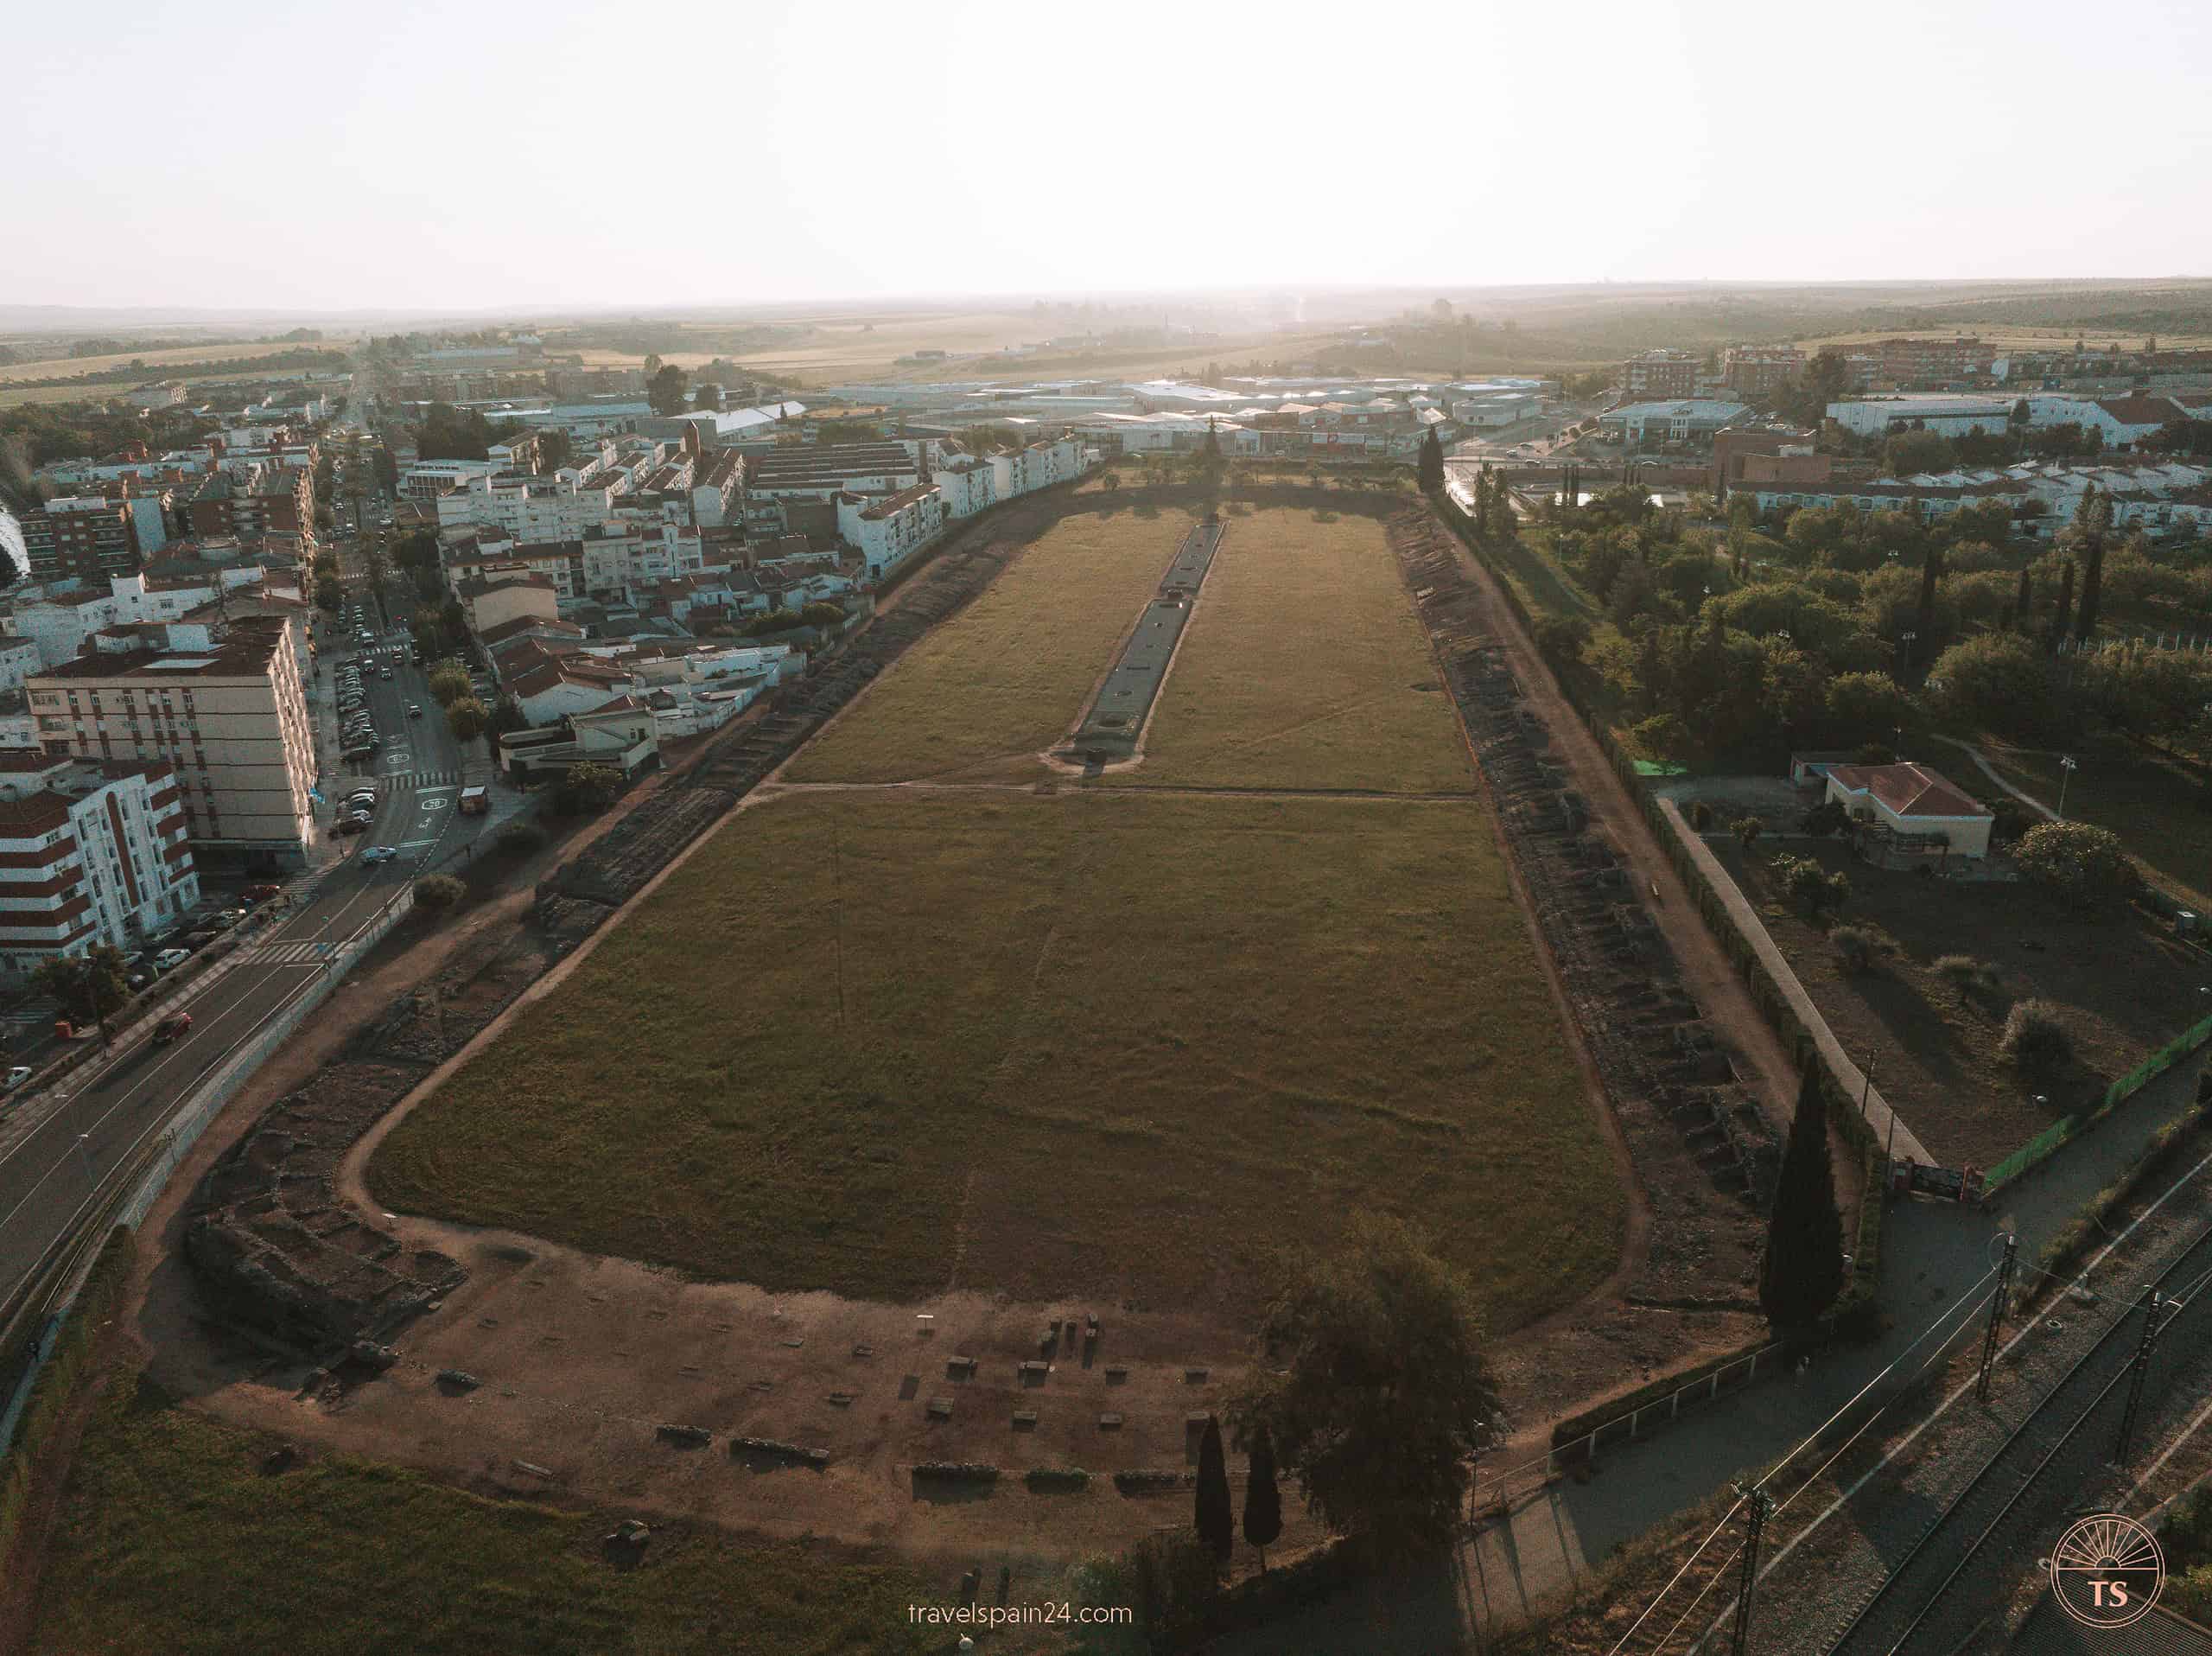 Drone view of the Roman Circus in Mérida, a vast ancient site used for chariot racing, stretching 403 meters long and 96.5 meters wide.